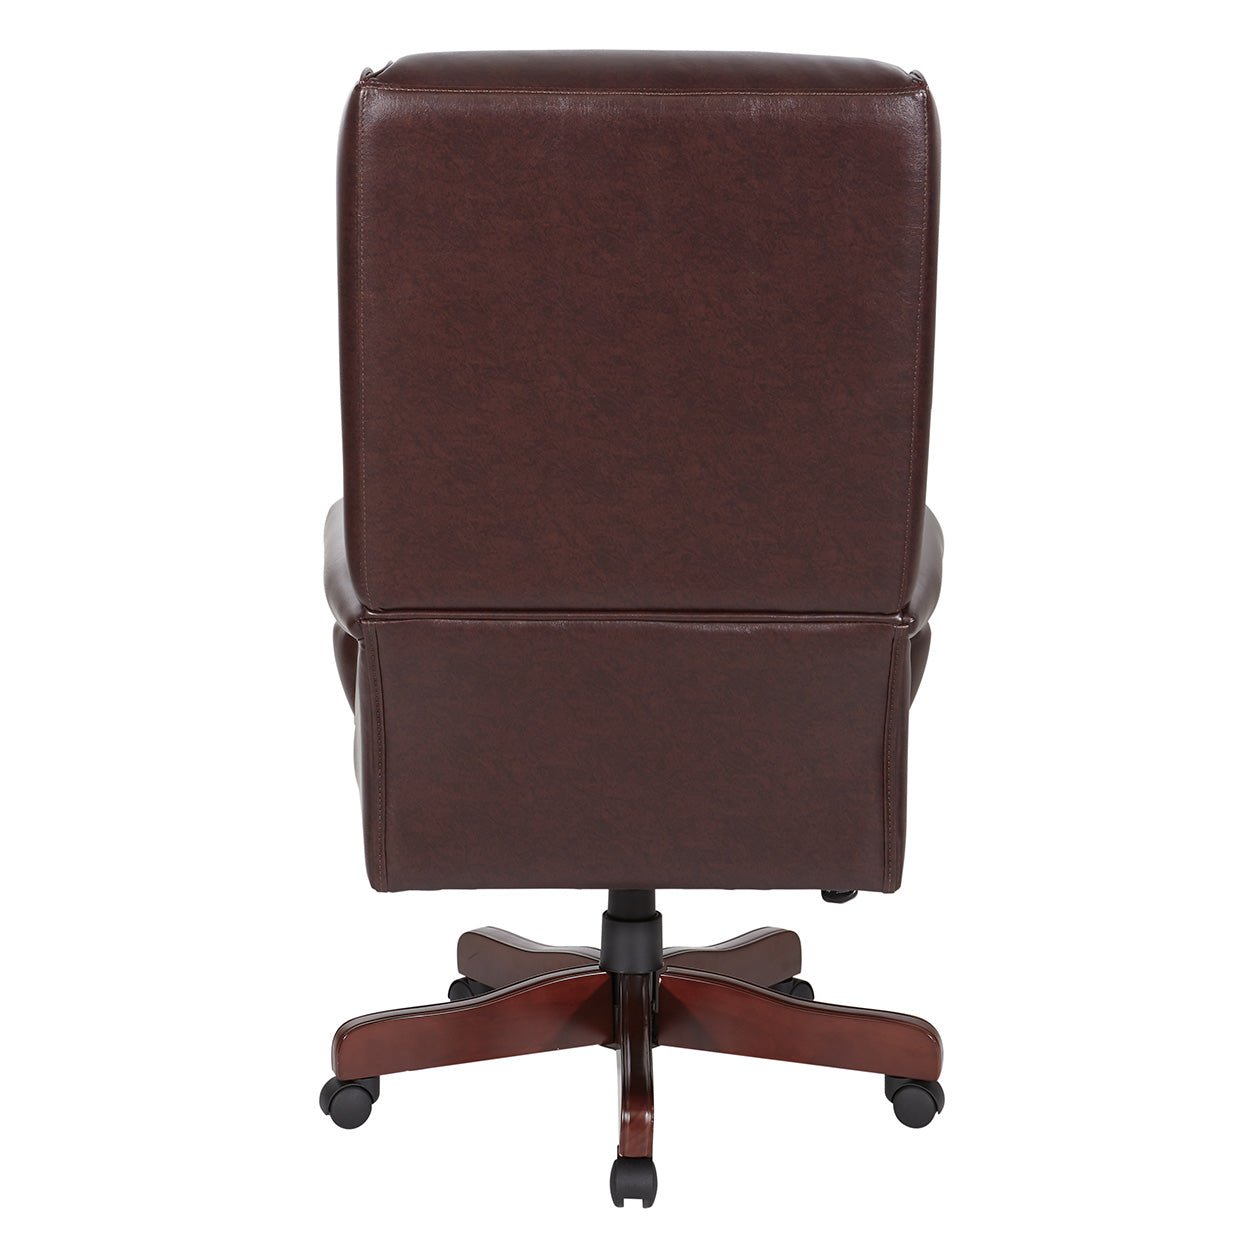 WorkSmart Deluxe High Back Traditional Executive Chair - TEX228-JT4 - Functional Office Furniture - TEX228-JT4